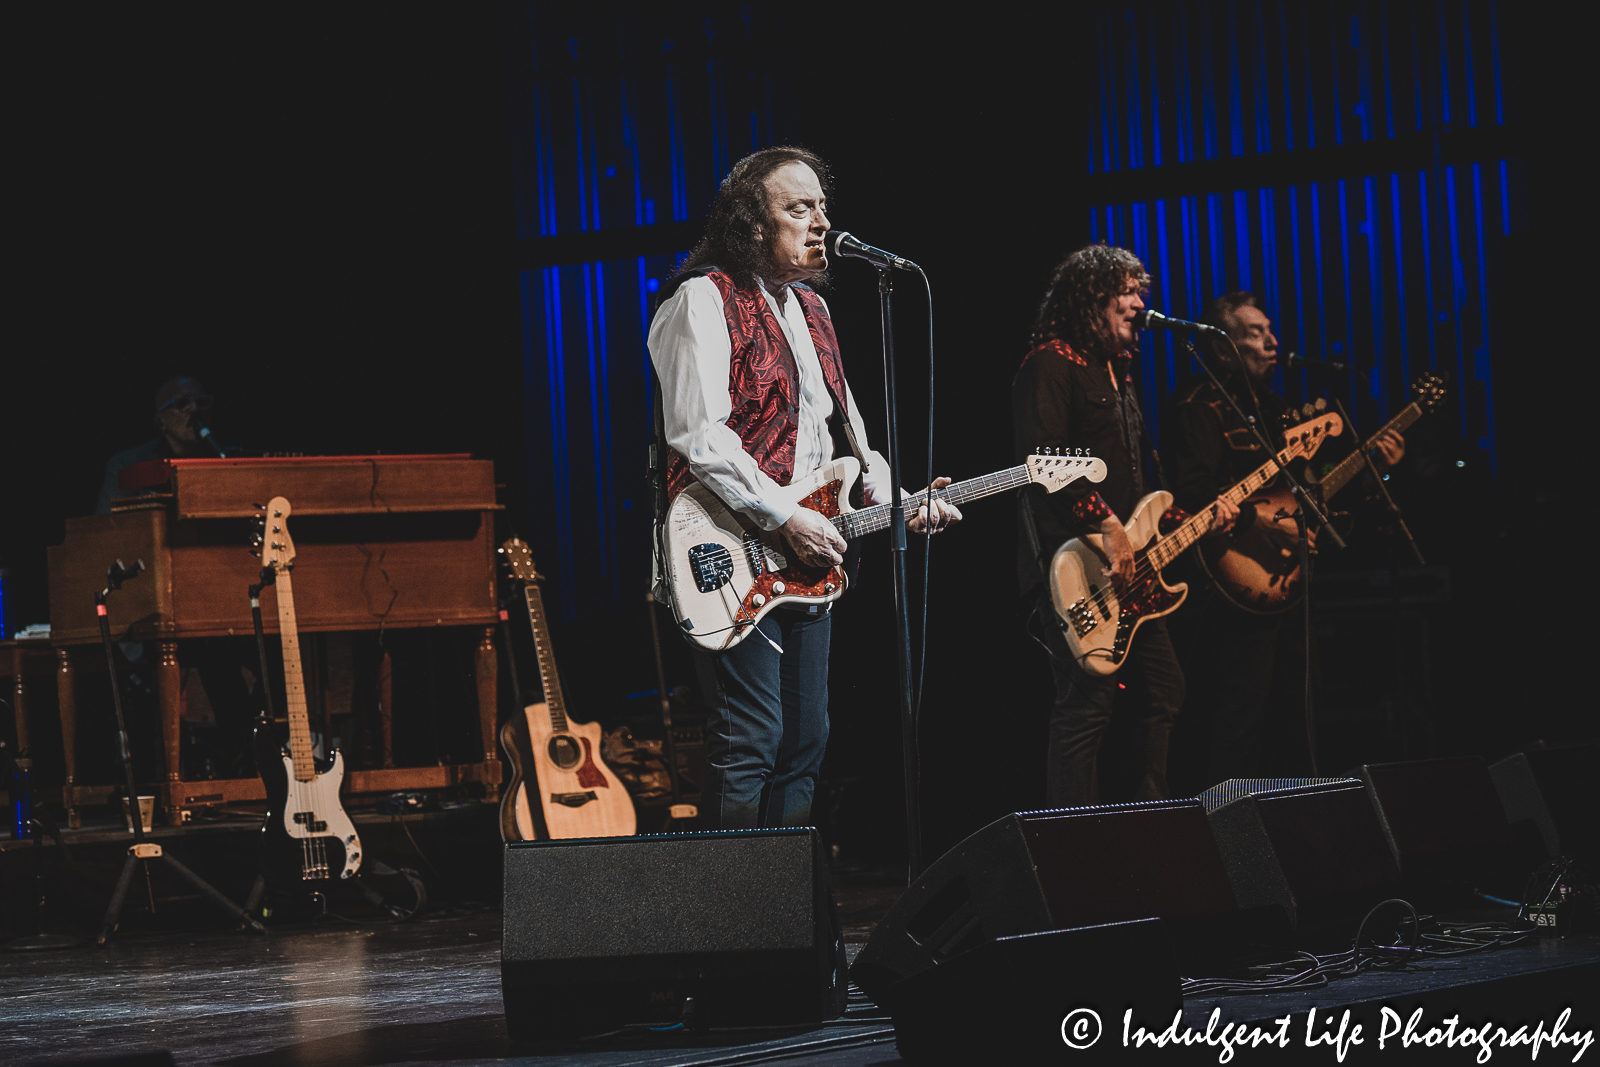 Tommy James singing "Draggin' the Line" from his "Christian of the World" with The Shondells album at Kauffman Center for the Performing Arts in Kansas City, MO on April 1, 2023.